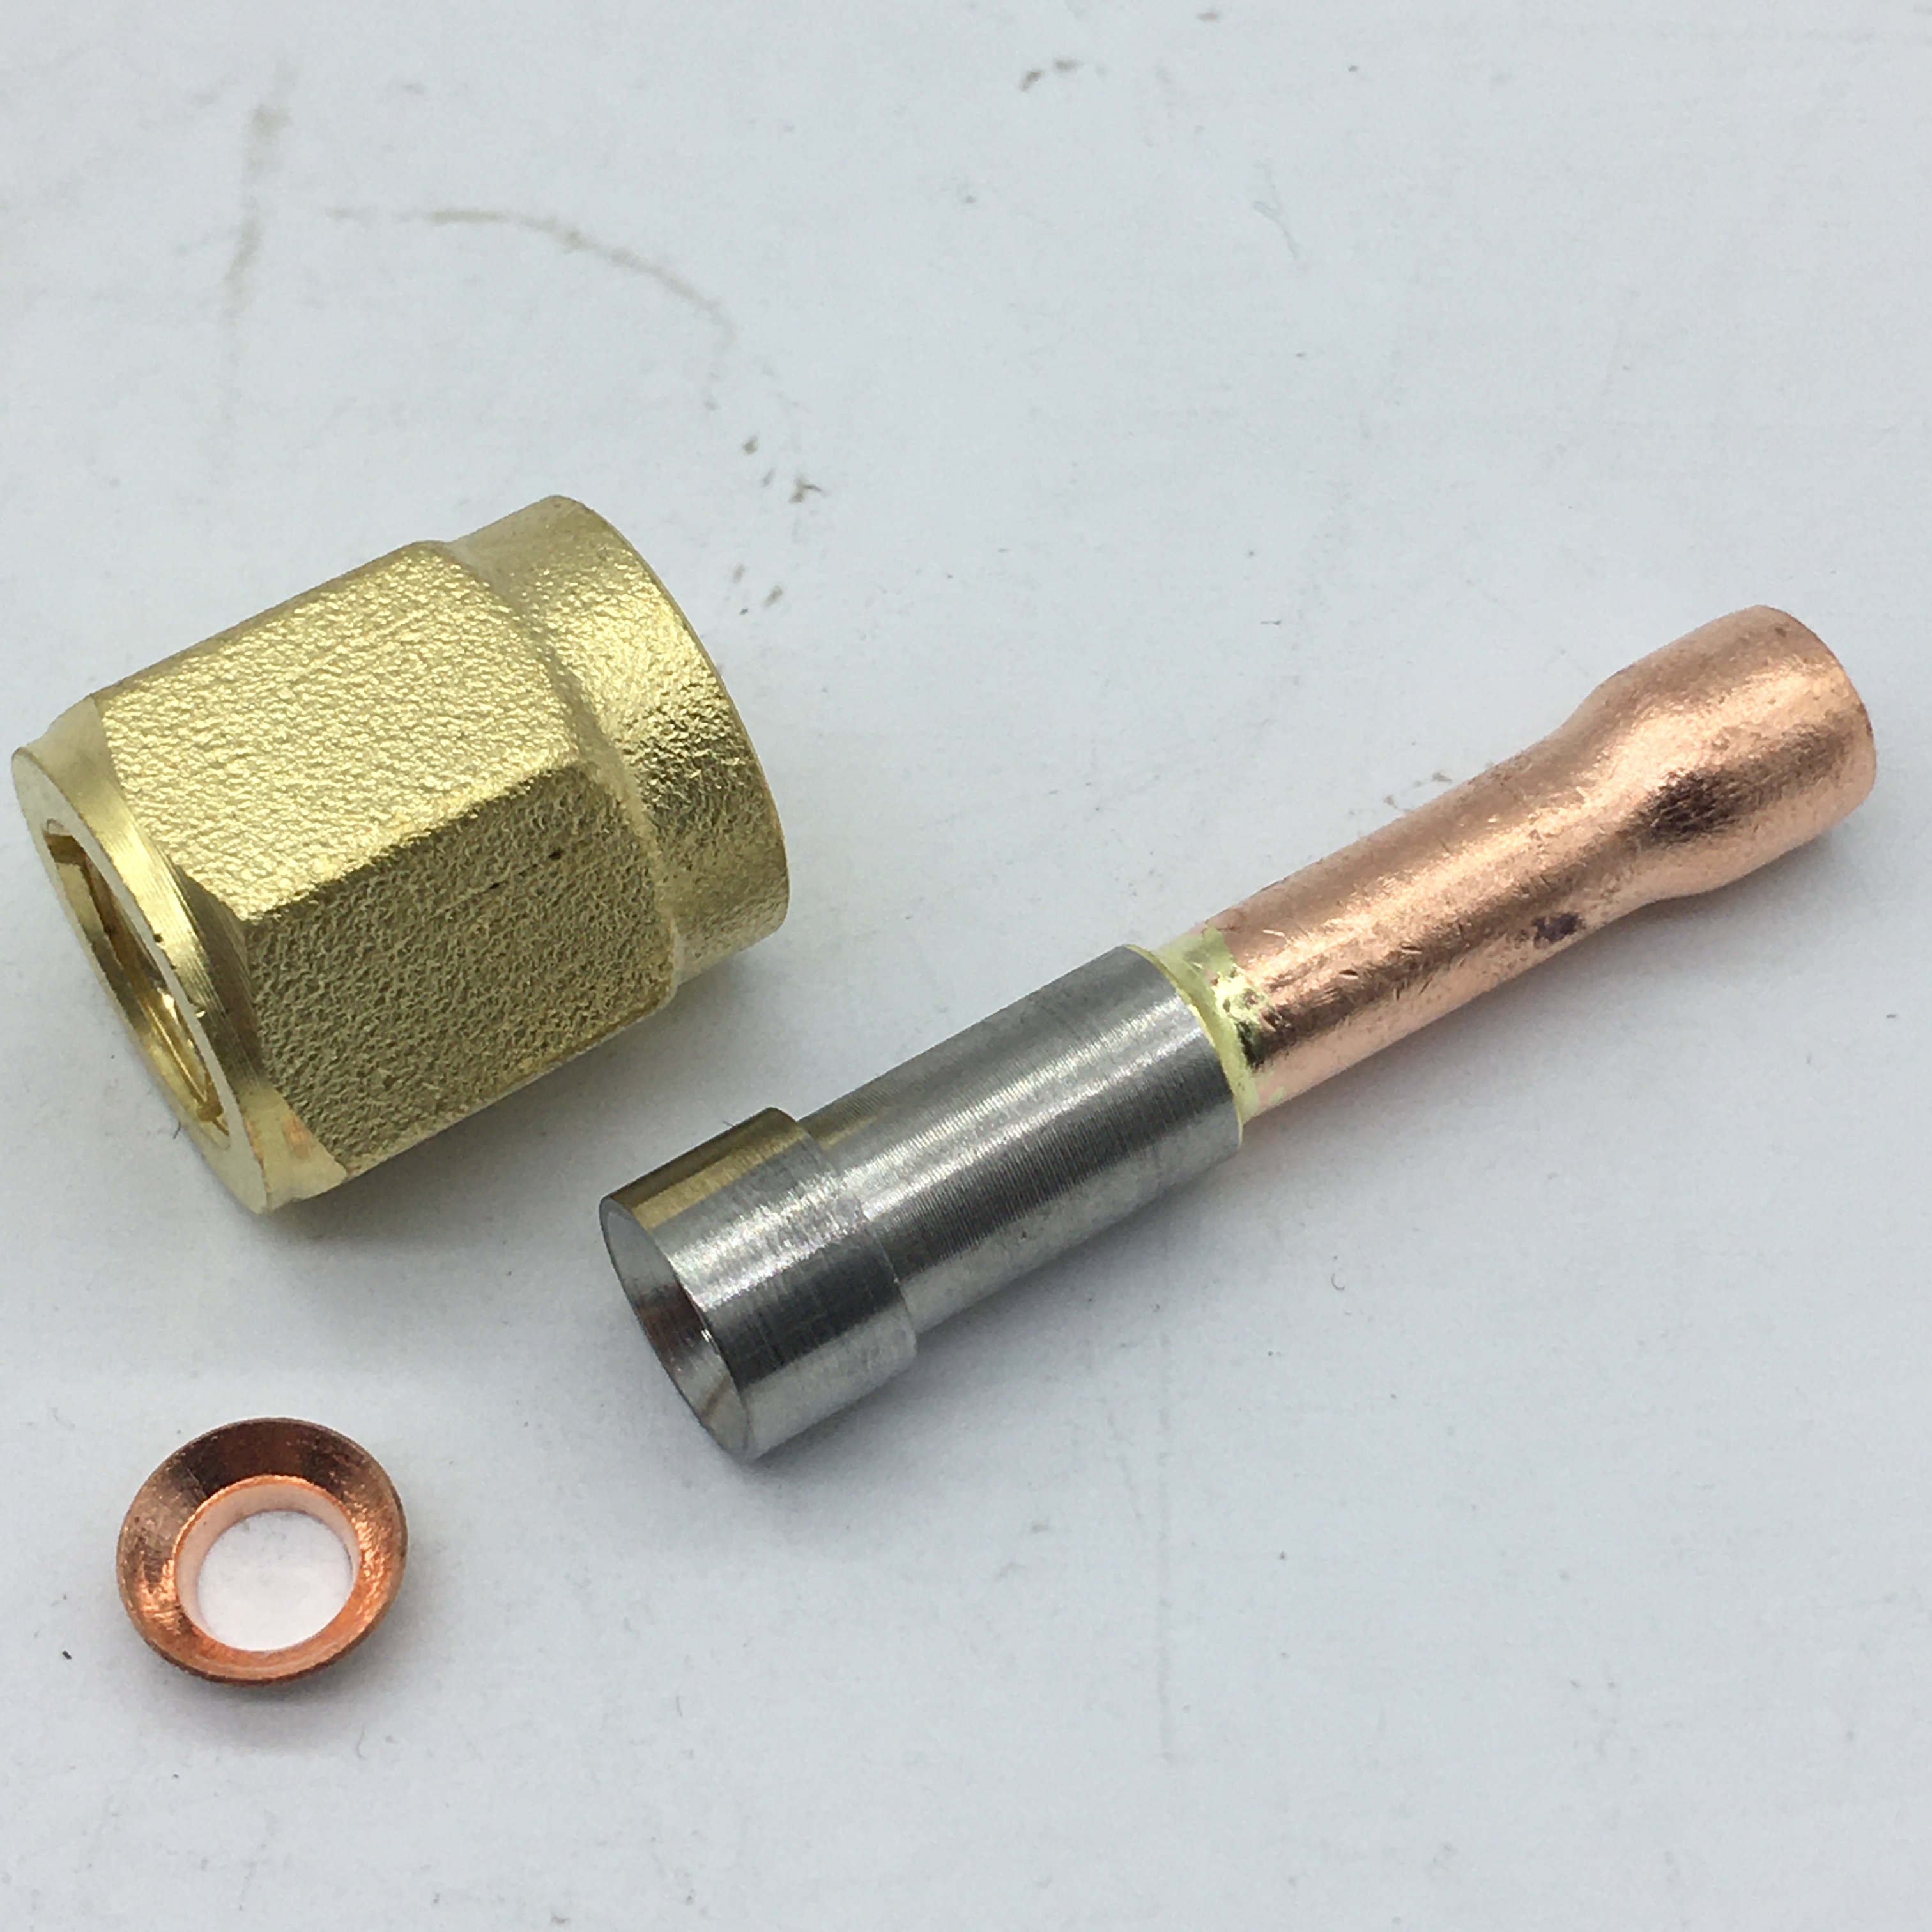 1/4" copper ODF X 1/4" female SAE thread straight joint is used as quick coupler in massive producing refrigeration appliances